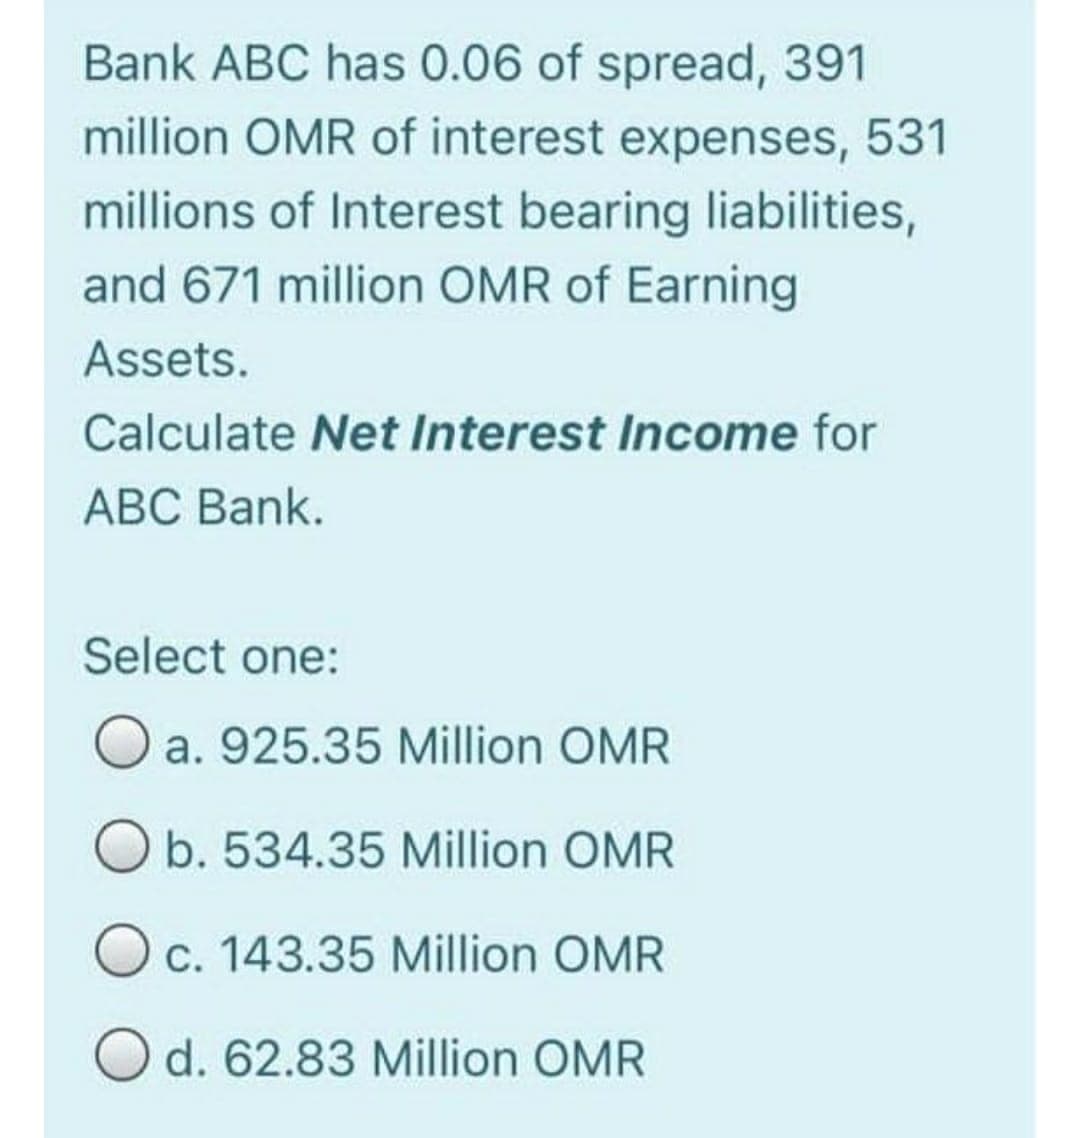 Bank ABC has 0.06 of spread, 391
million OMR of interest expenses,
531
millions of Interest bearing liabilities,
and 671 million OMR of Earning
Assets.
Calculate Net Interest Income for
АВС Bank.
Select one:
O a. 925.35 Million OMR
O b. 534.35 Million OMR
Oc. 143.35 Million OMR
O d. 62.83 Million OMR
